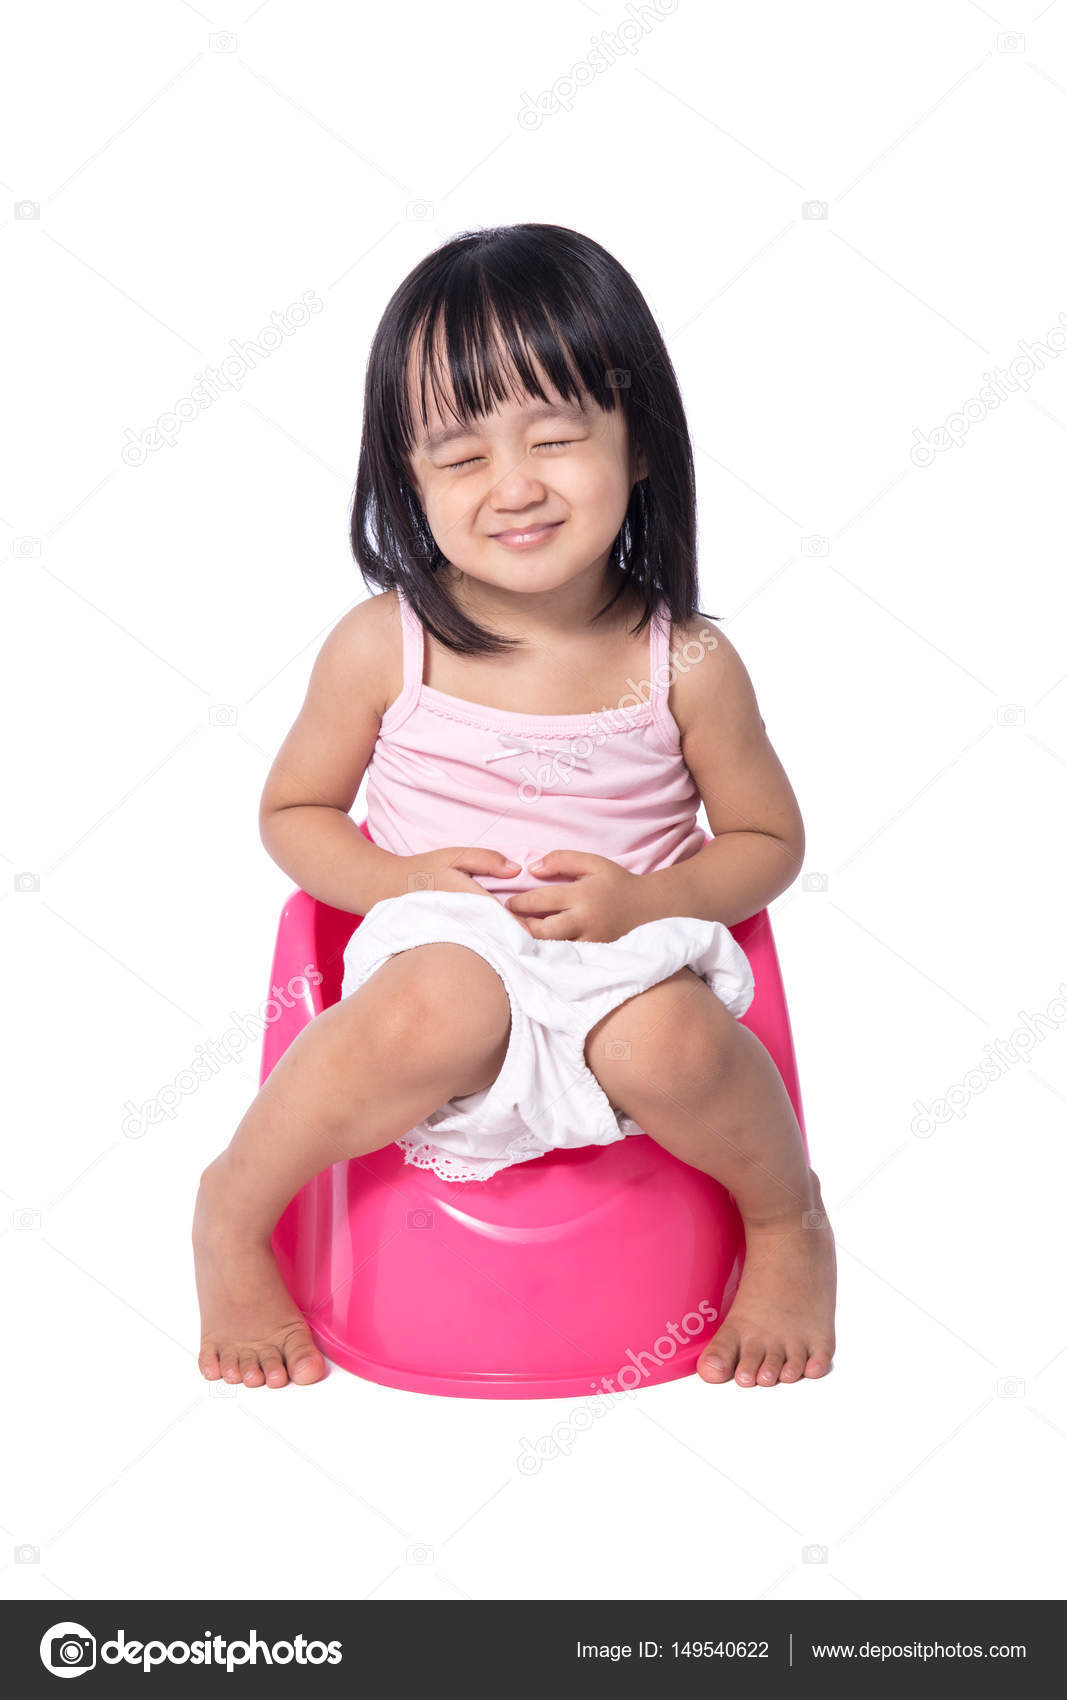 Little Girl Pee Pictures Little Girl Pee Stock Photos Images Depositphotos